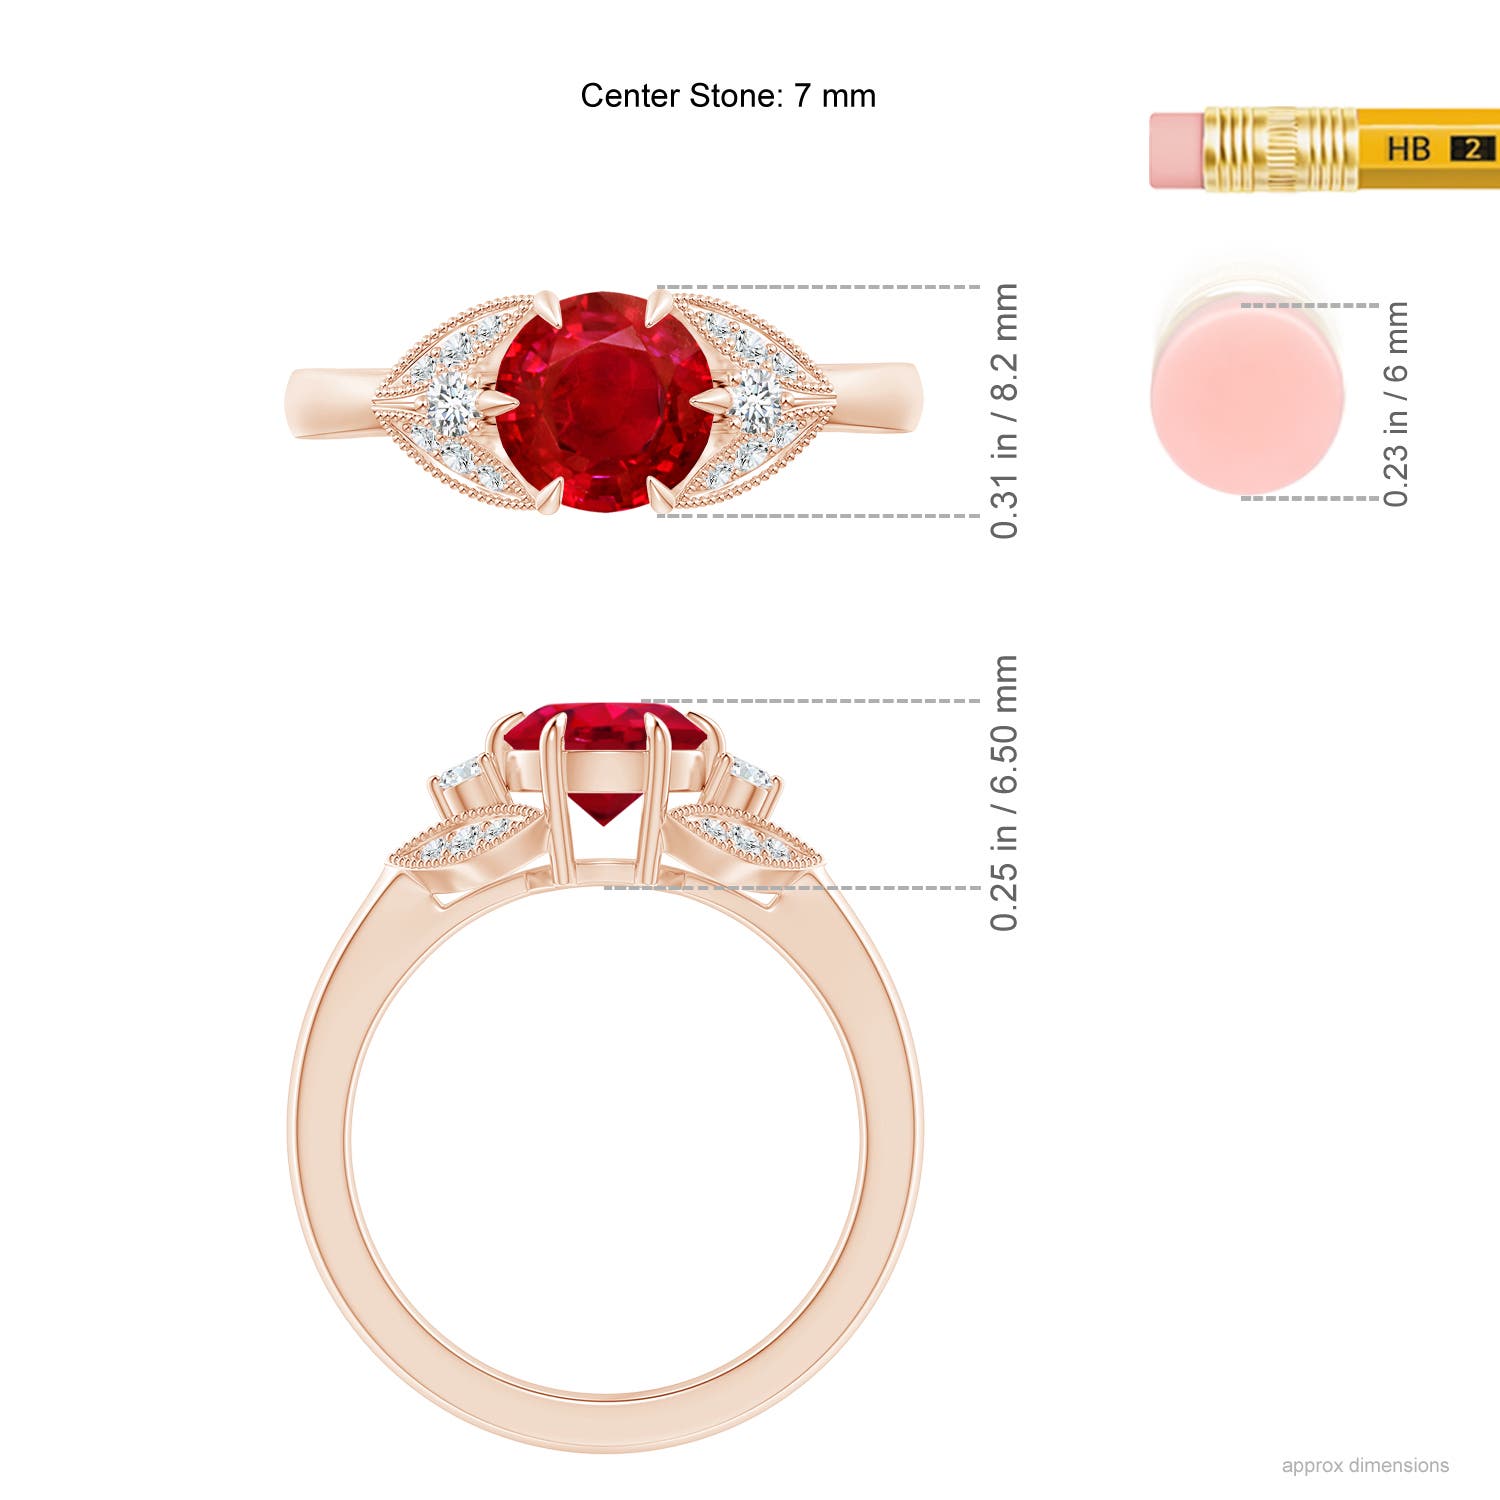 AAA - Ruby / 1.64 CT / 14 KT Rose Gold